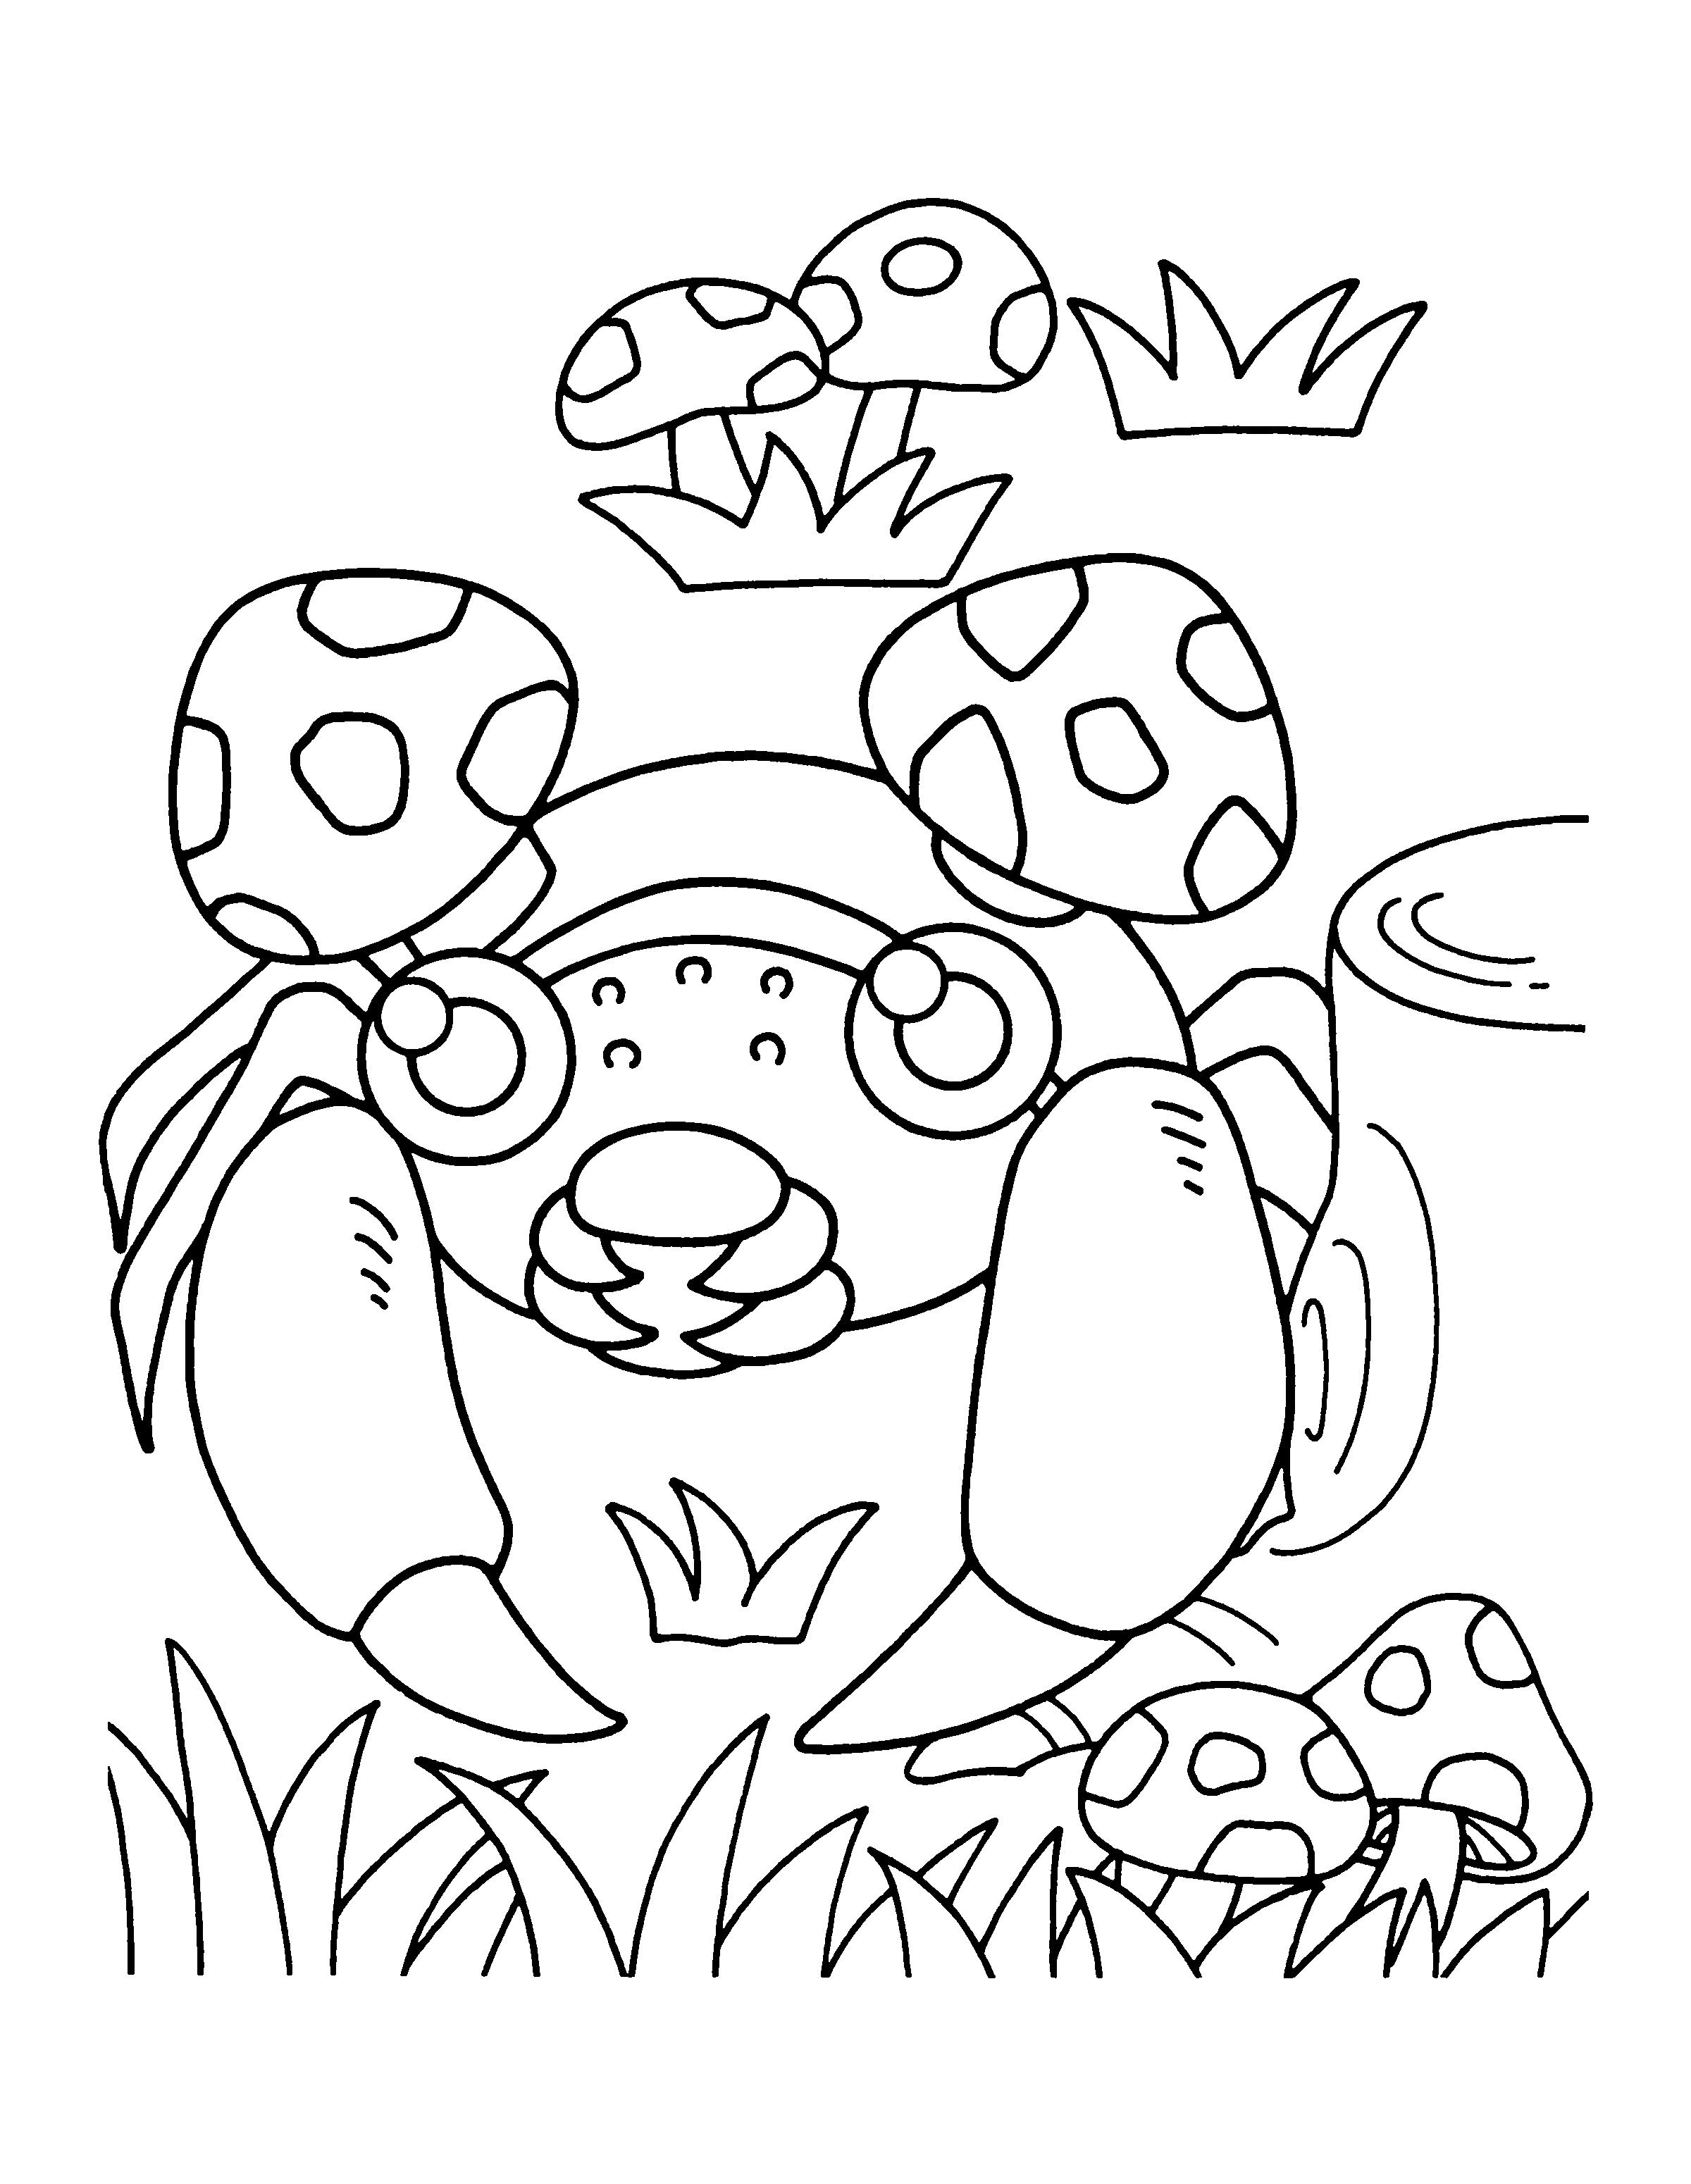 animated-coloring-pages-pokemon-image-0690